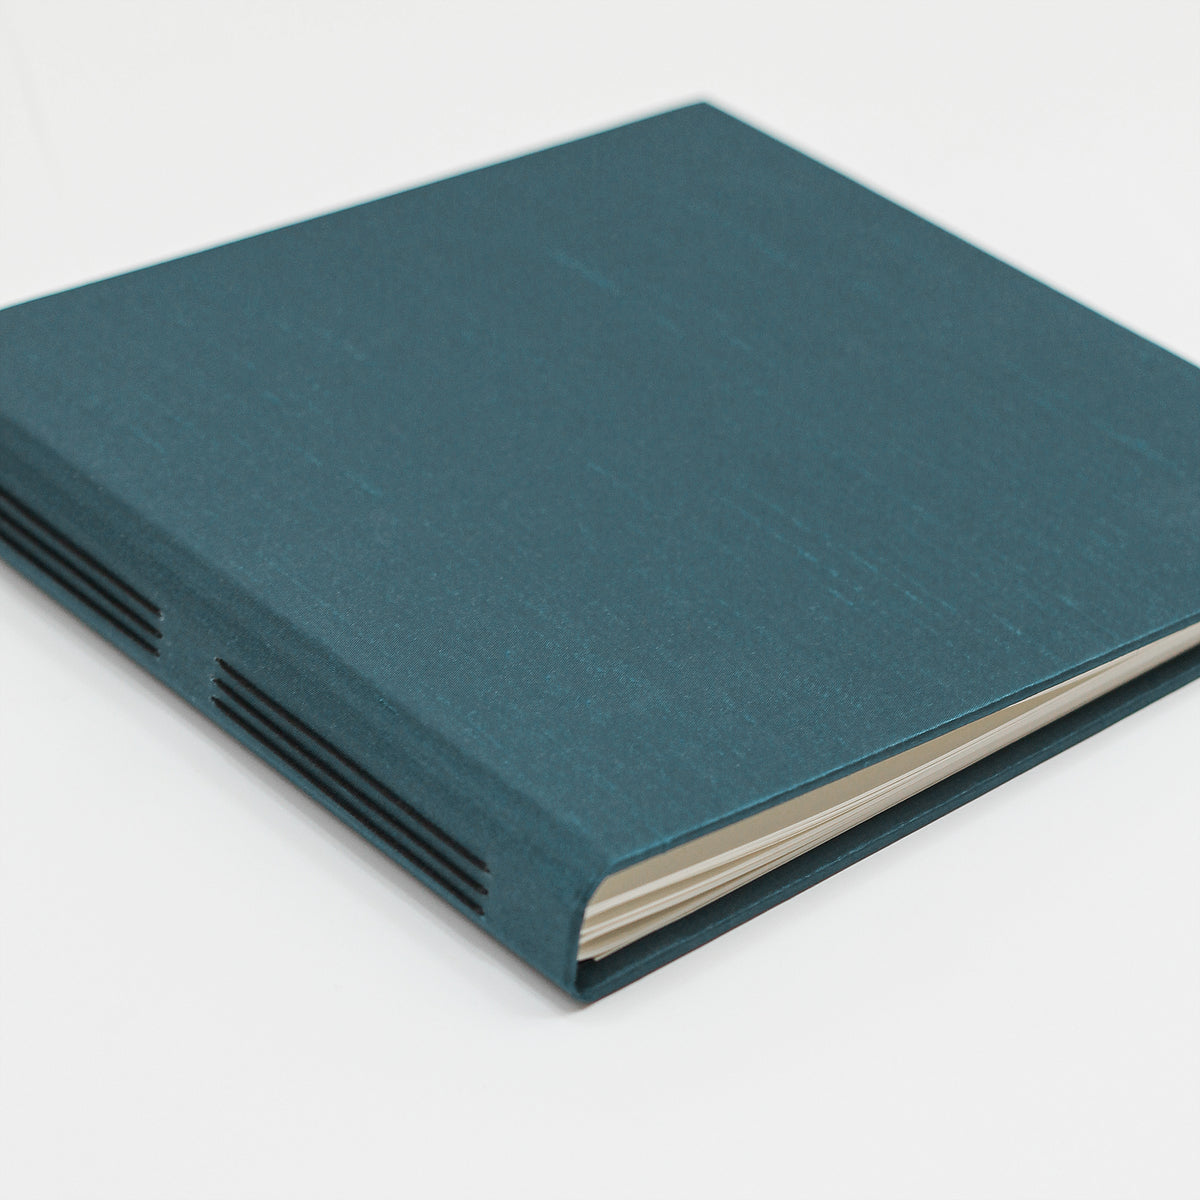 Event Guestbook Embossed with “Guests” with Teal Blue Silk Cover